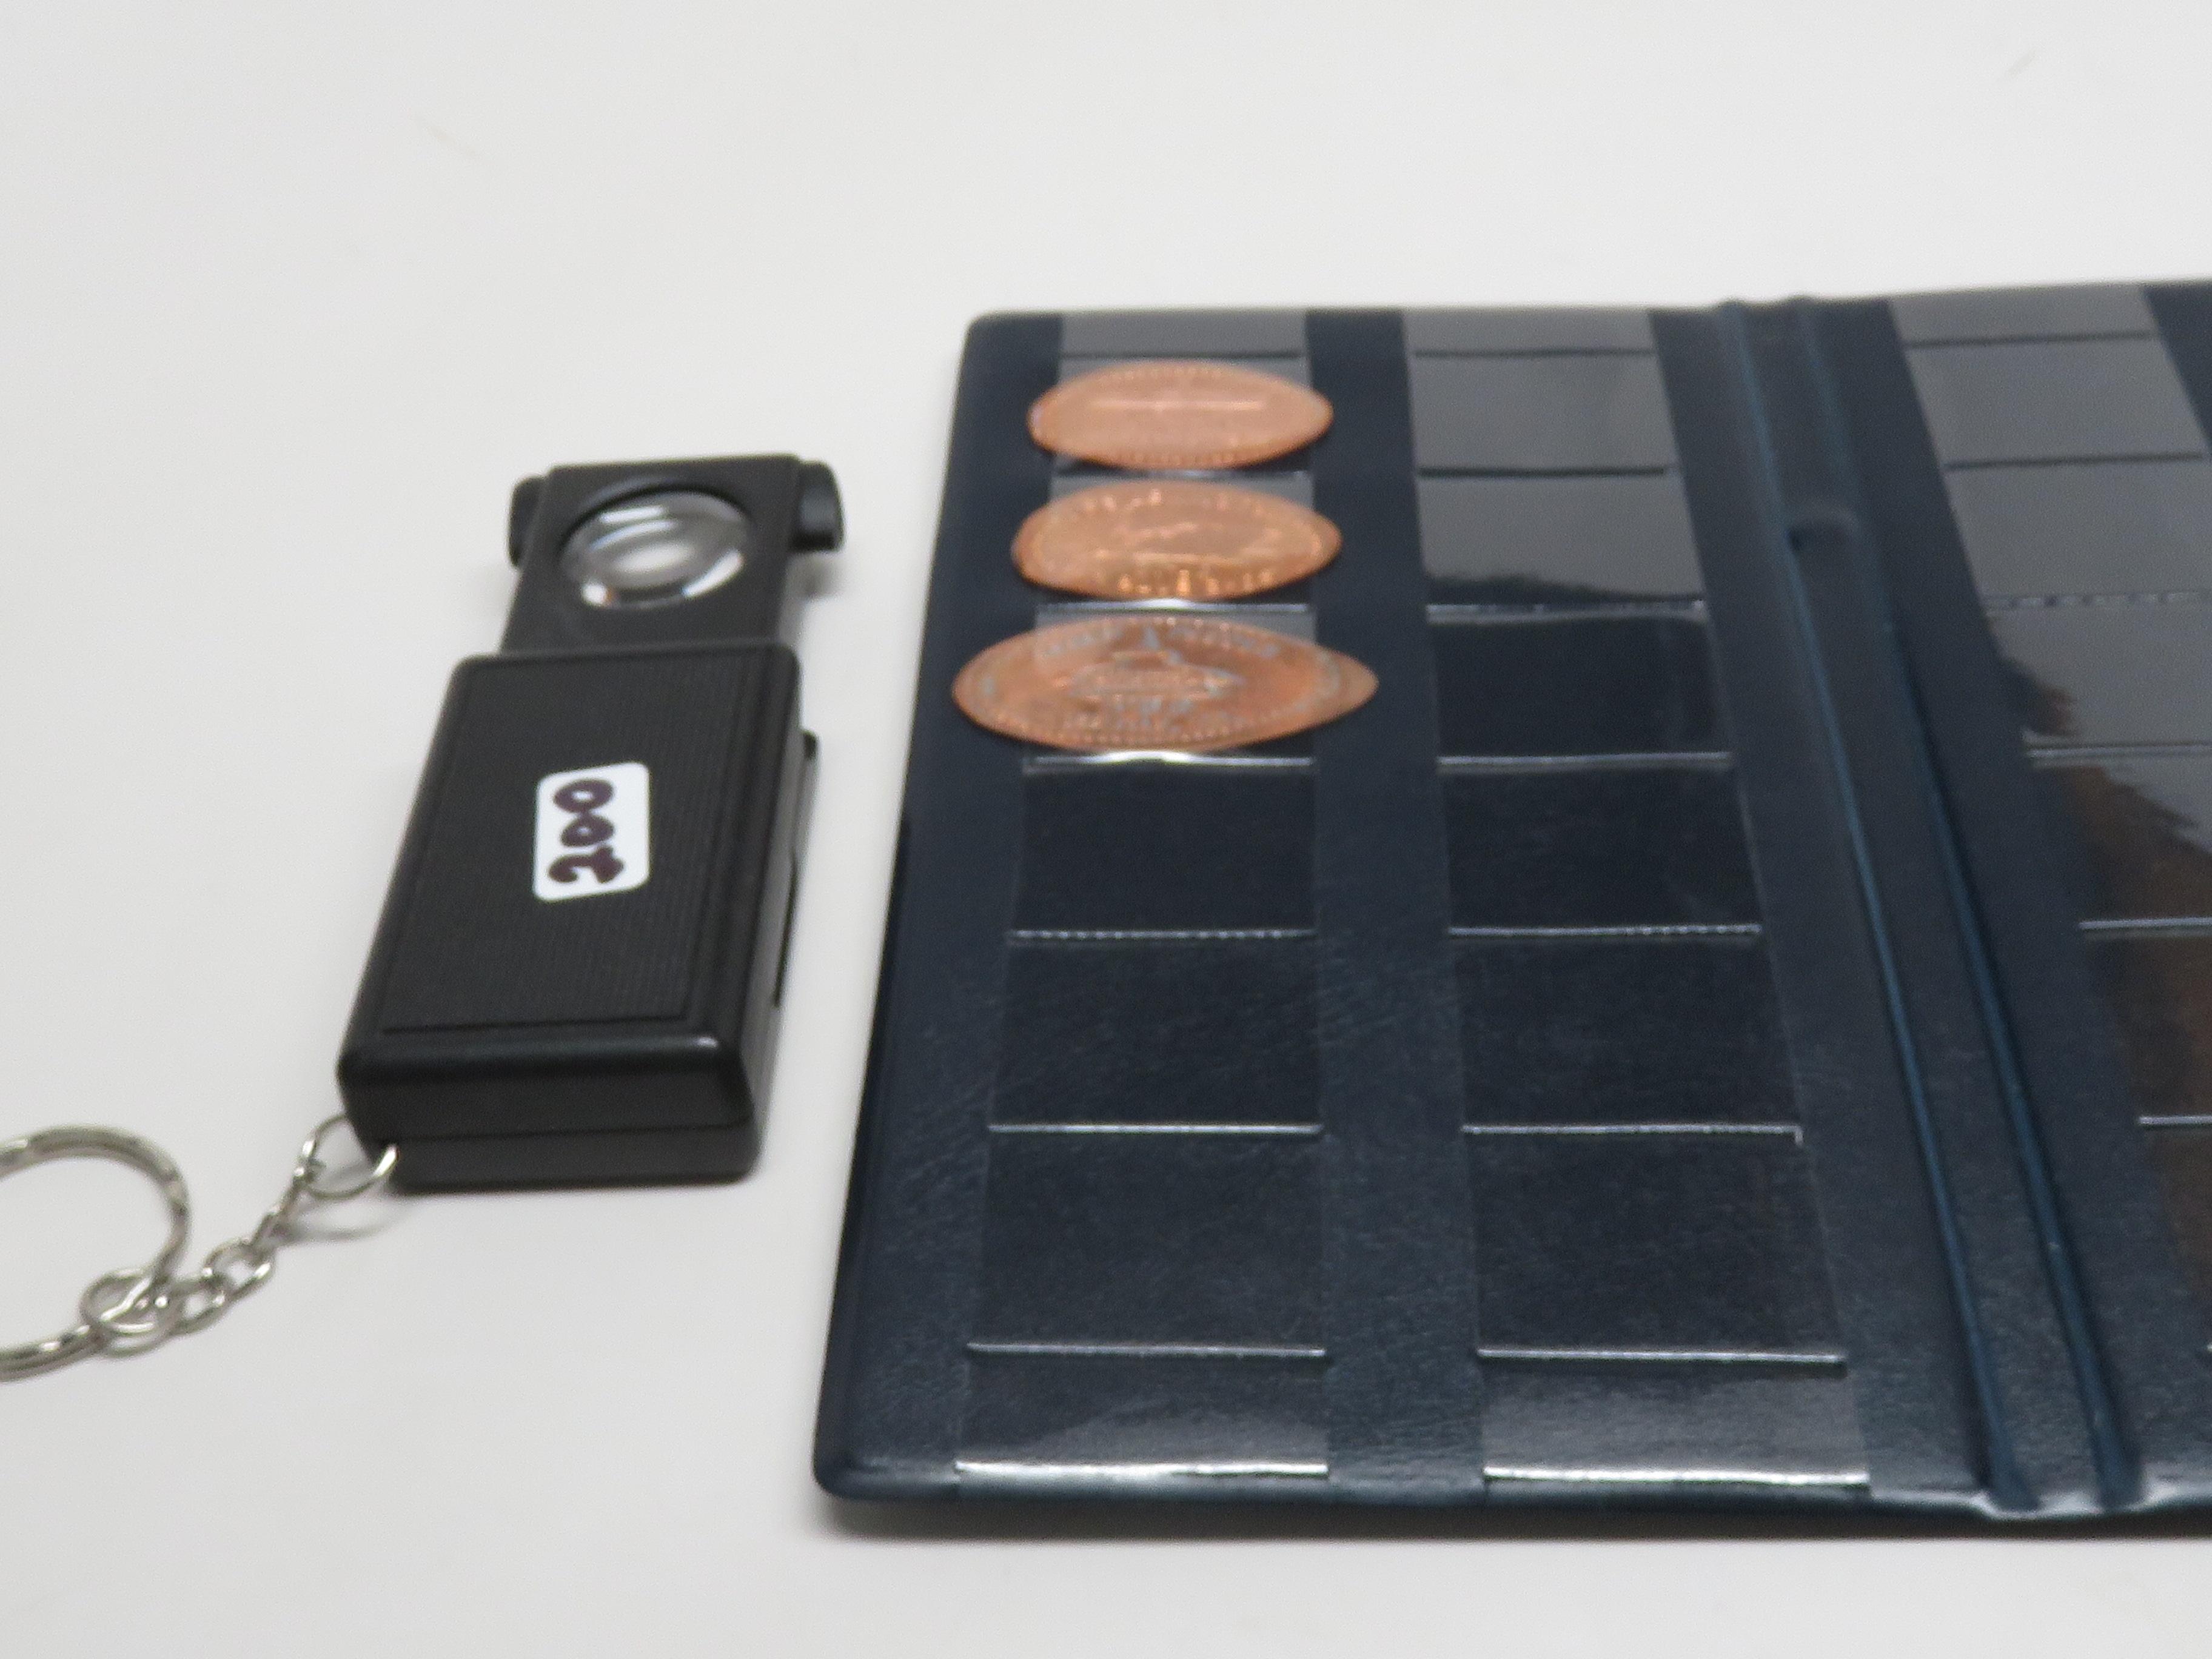 New US Elongated Penny Collector Souvenier Coin Album with 4 Coins PLUS lighted pocket magnifer